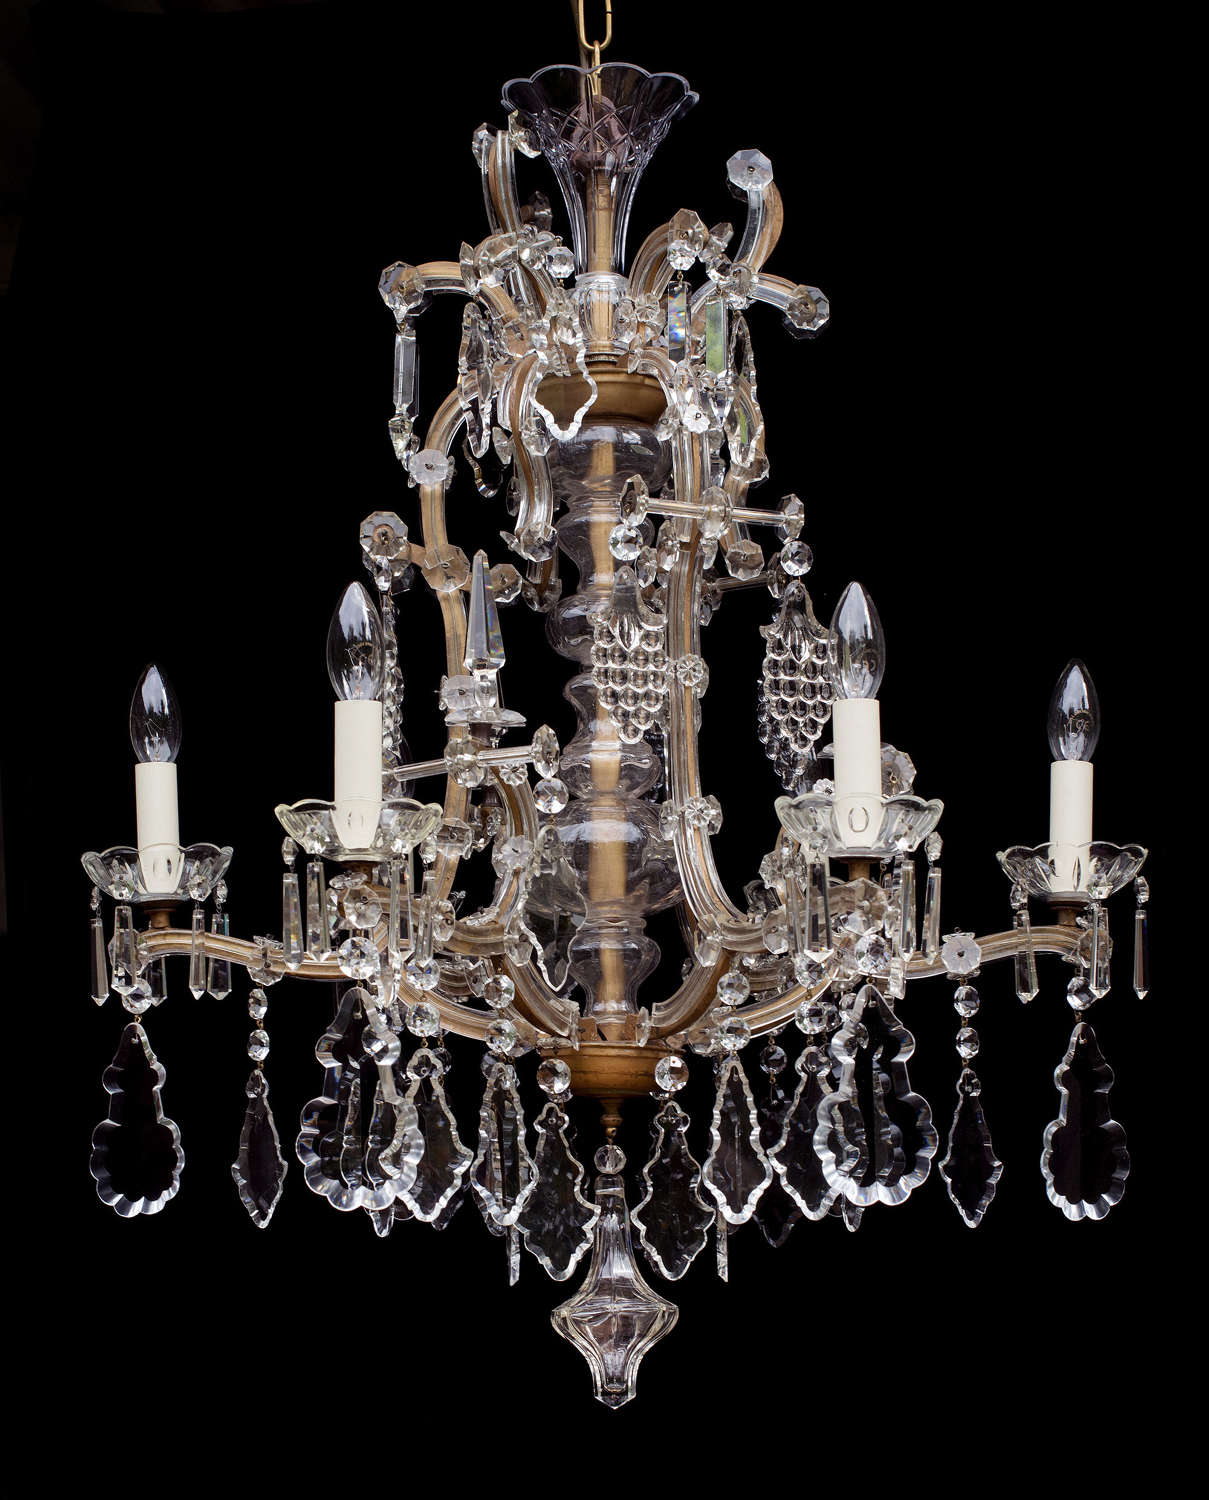 6 light Italian antique chandelier with grapes and crystal leaf drops